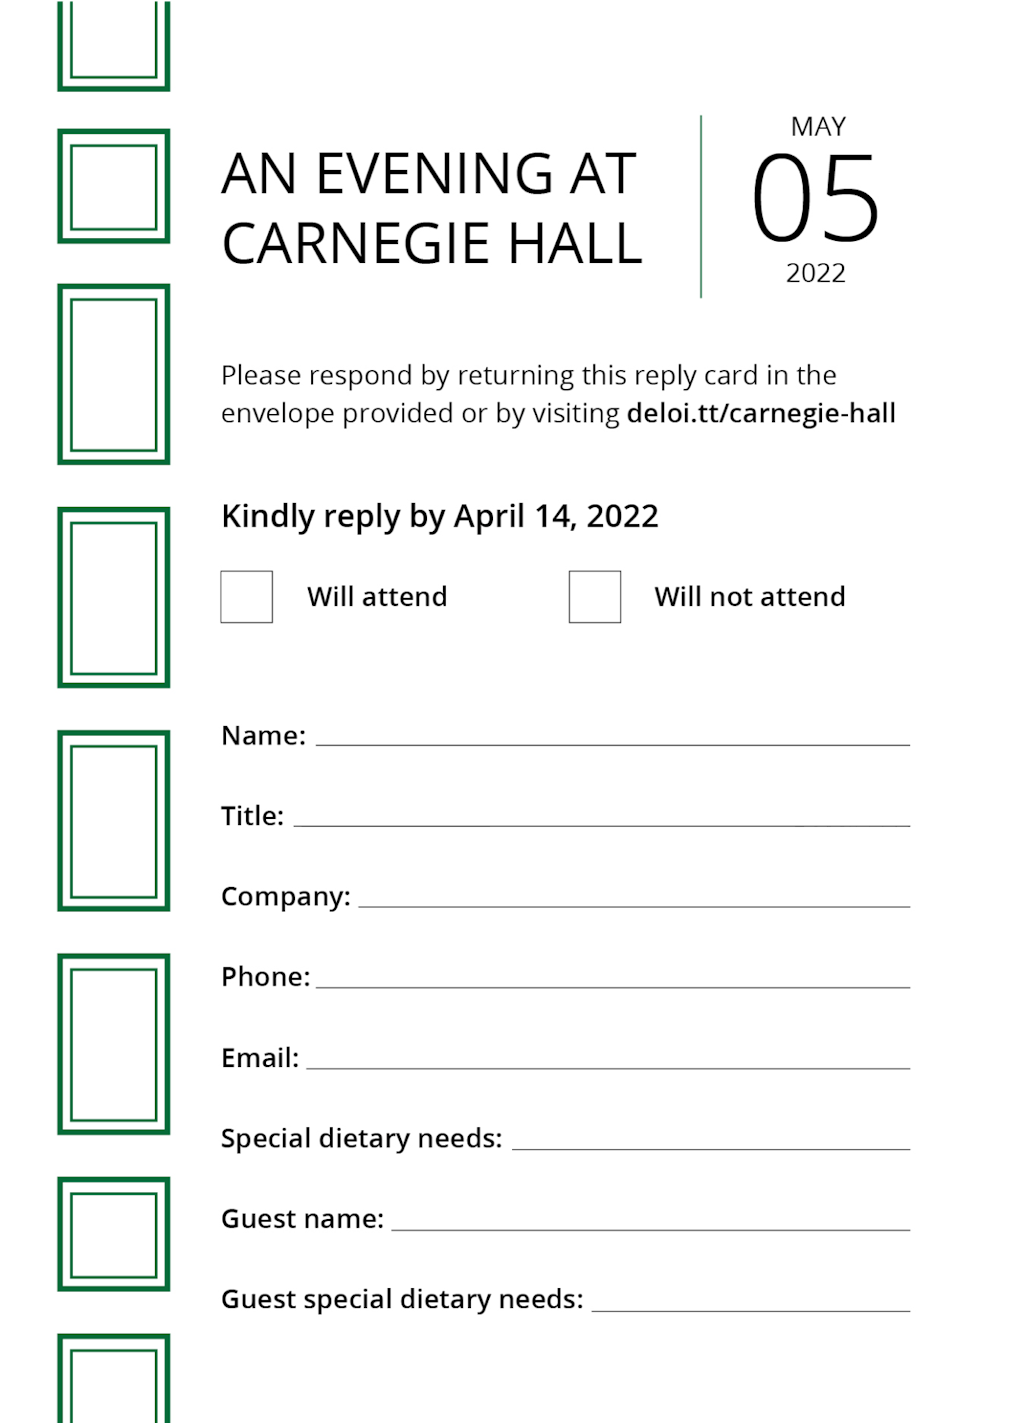 Carnegie Hall reply card